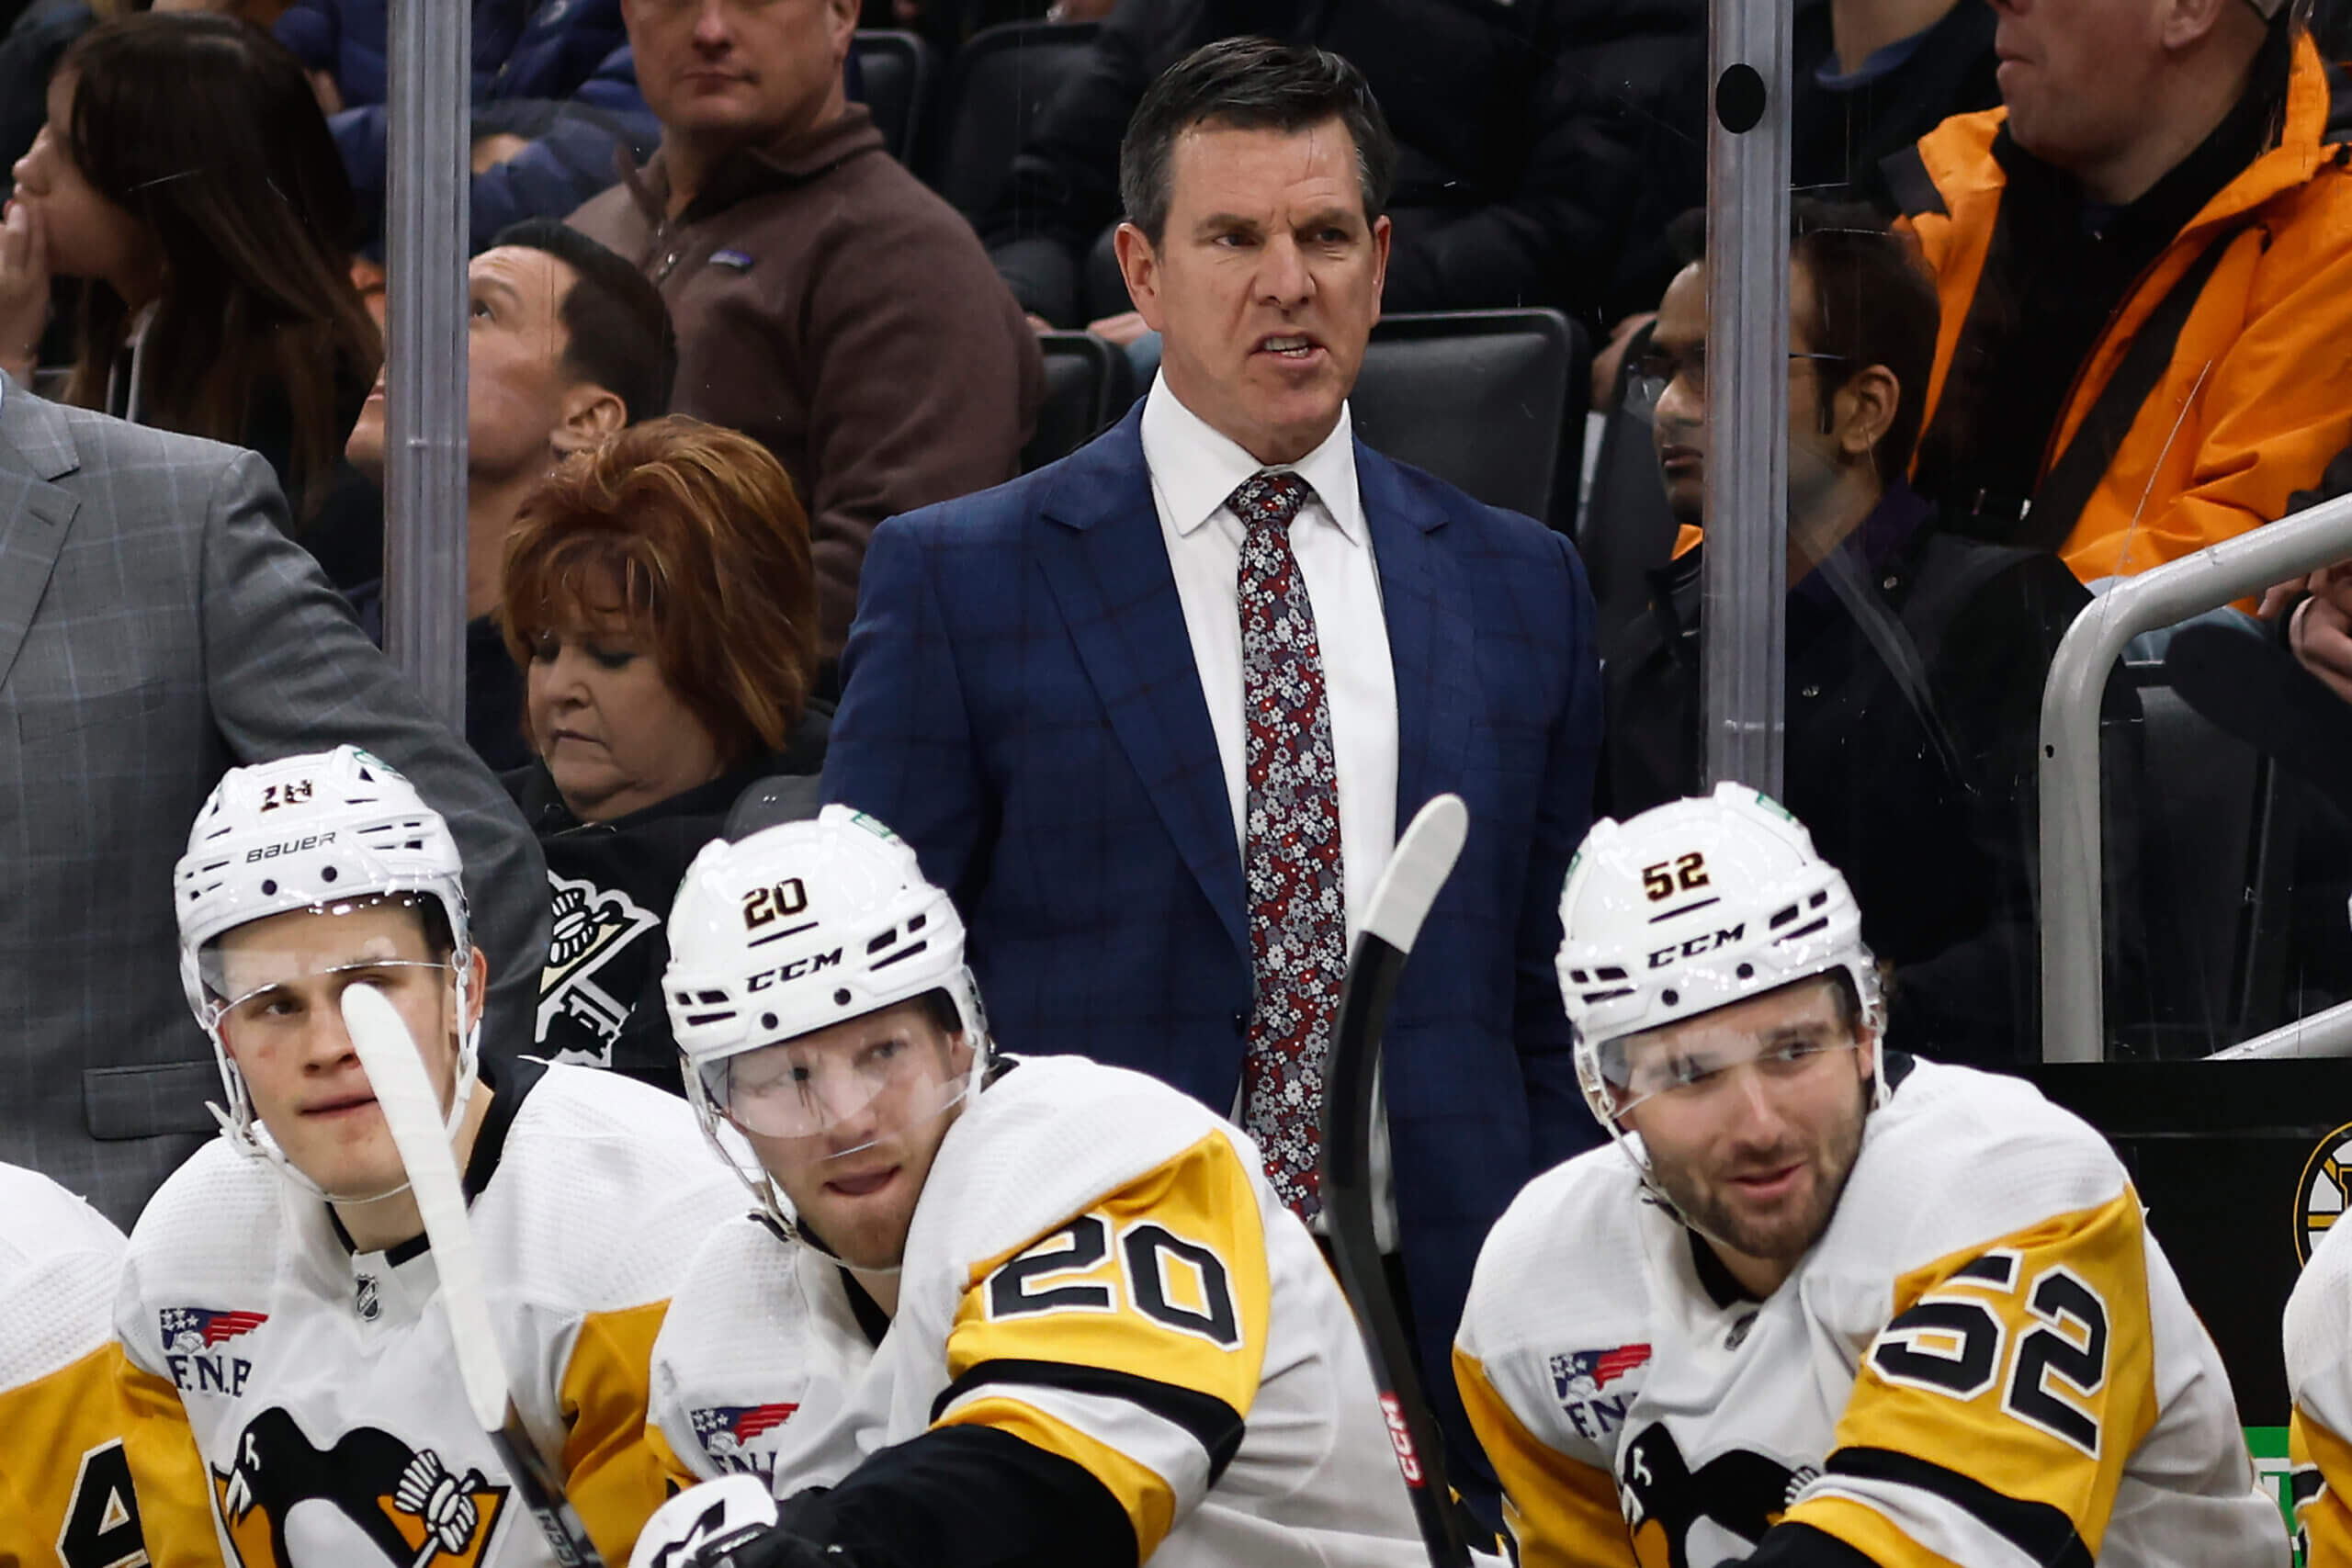 Penguins GM: ‘No permissions granted’ for Devils to speak with Mike Sullivan